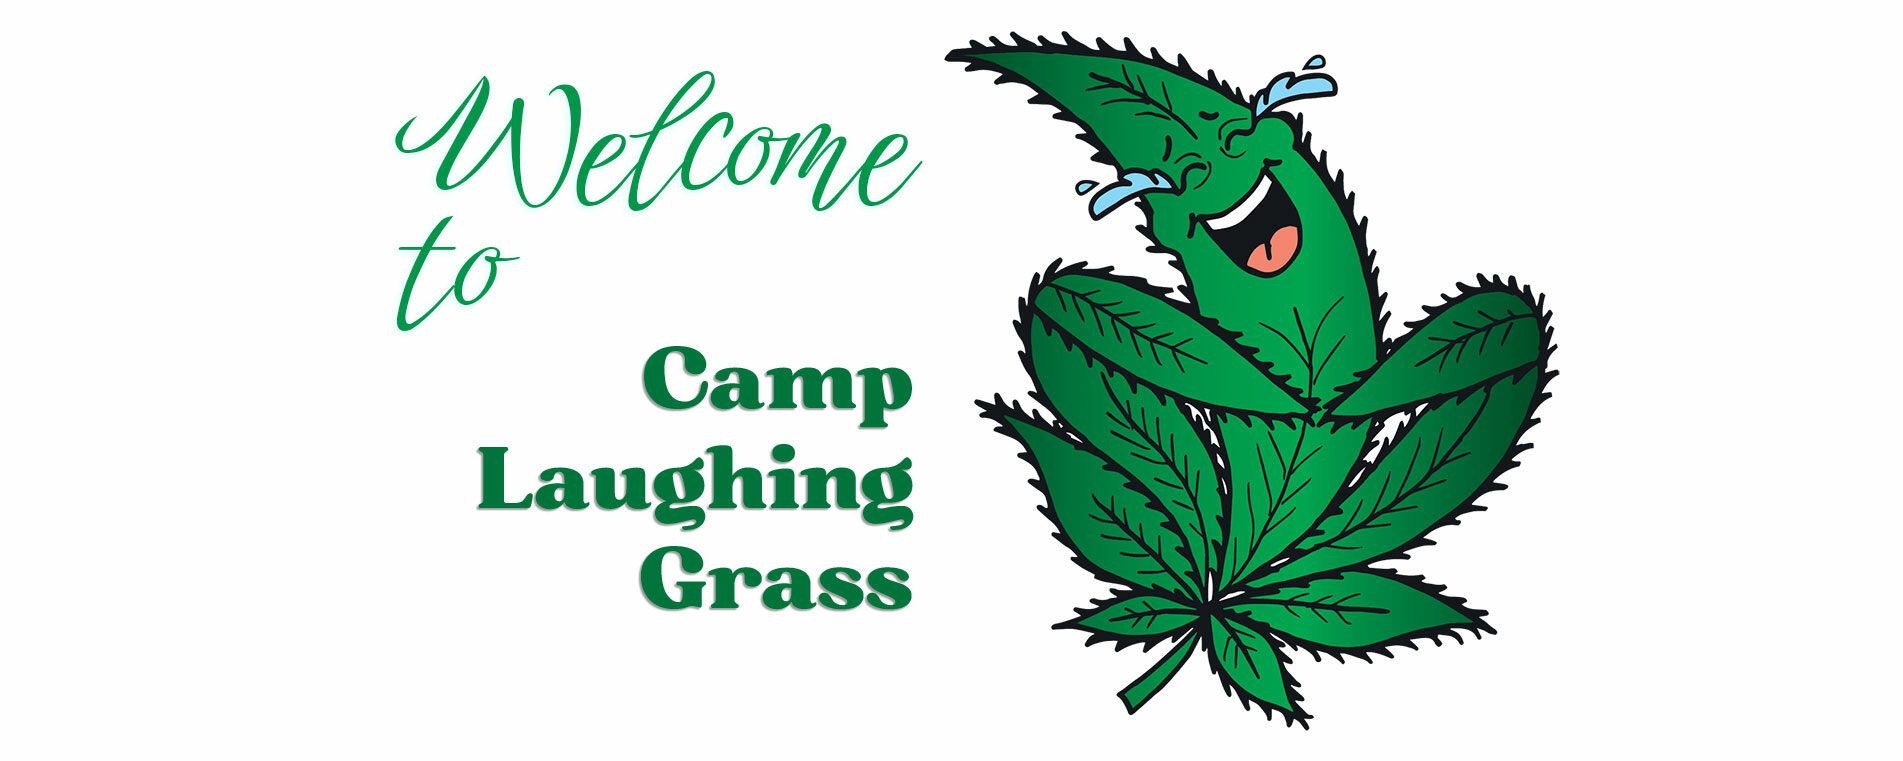 Welcome to Camp Laughing Grass